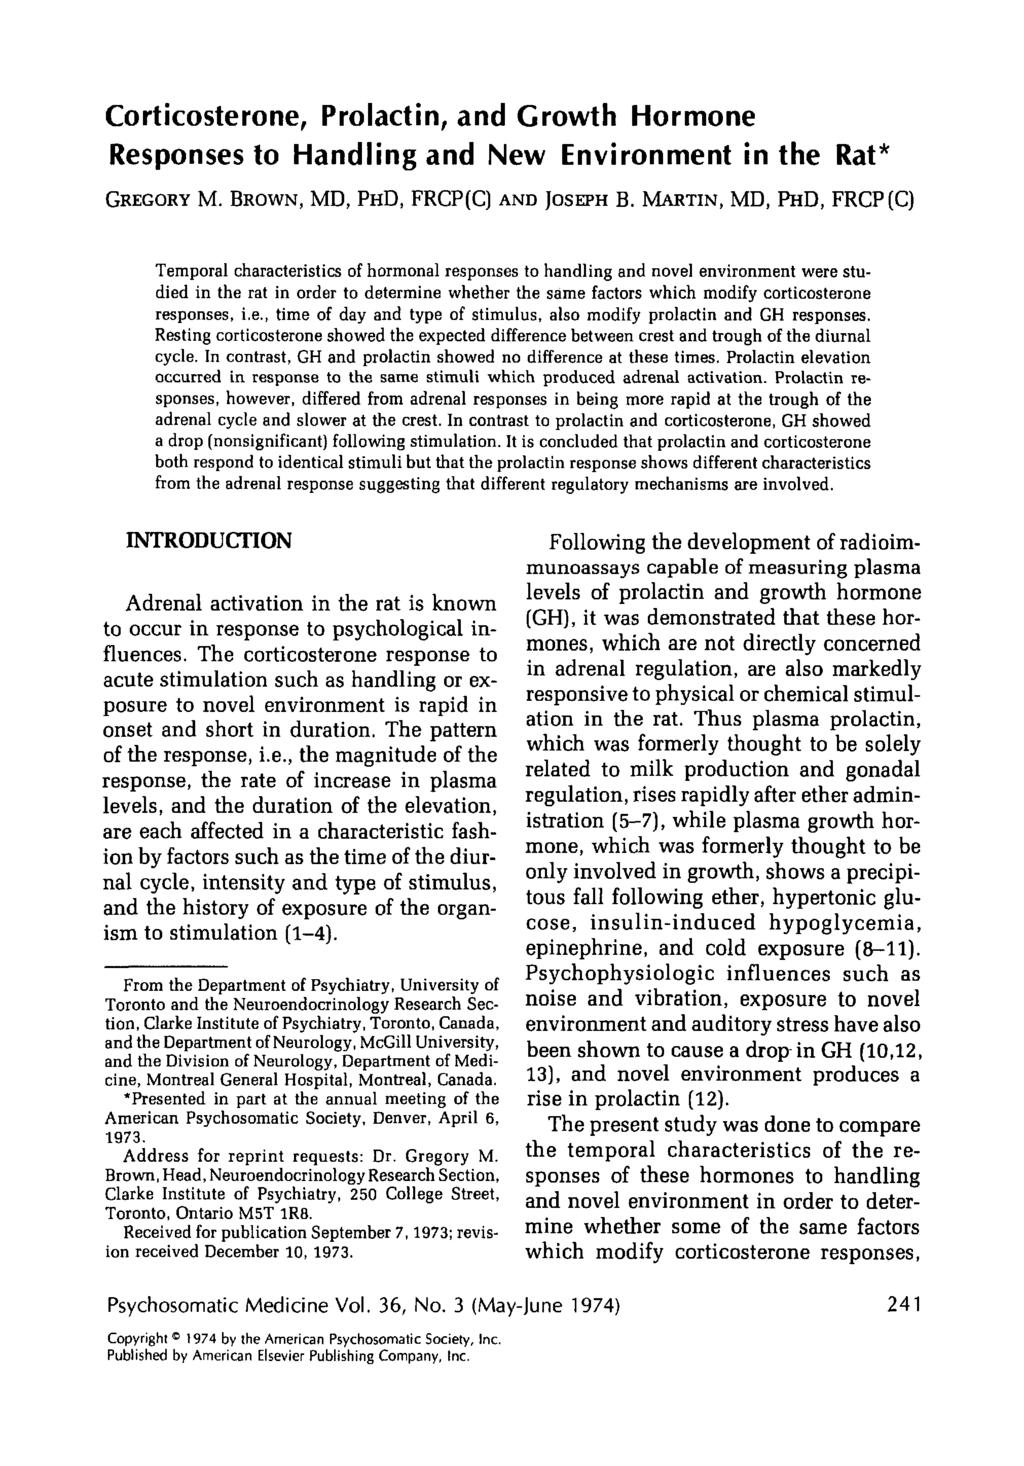 Corticosterone, Prolactin, and Growth Hormone Responses to Handling and New Environment in the Rat* GREGORY M. BROWN, MD, PHD, FRCP(C) AND JOSEPH B.